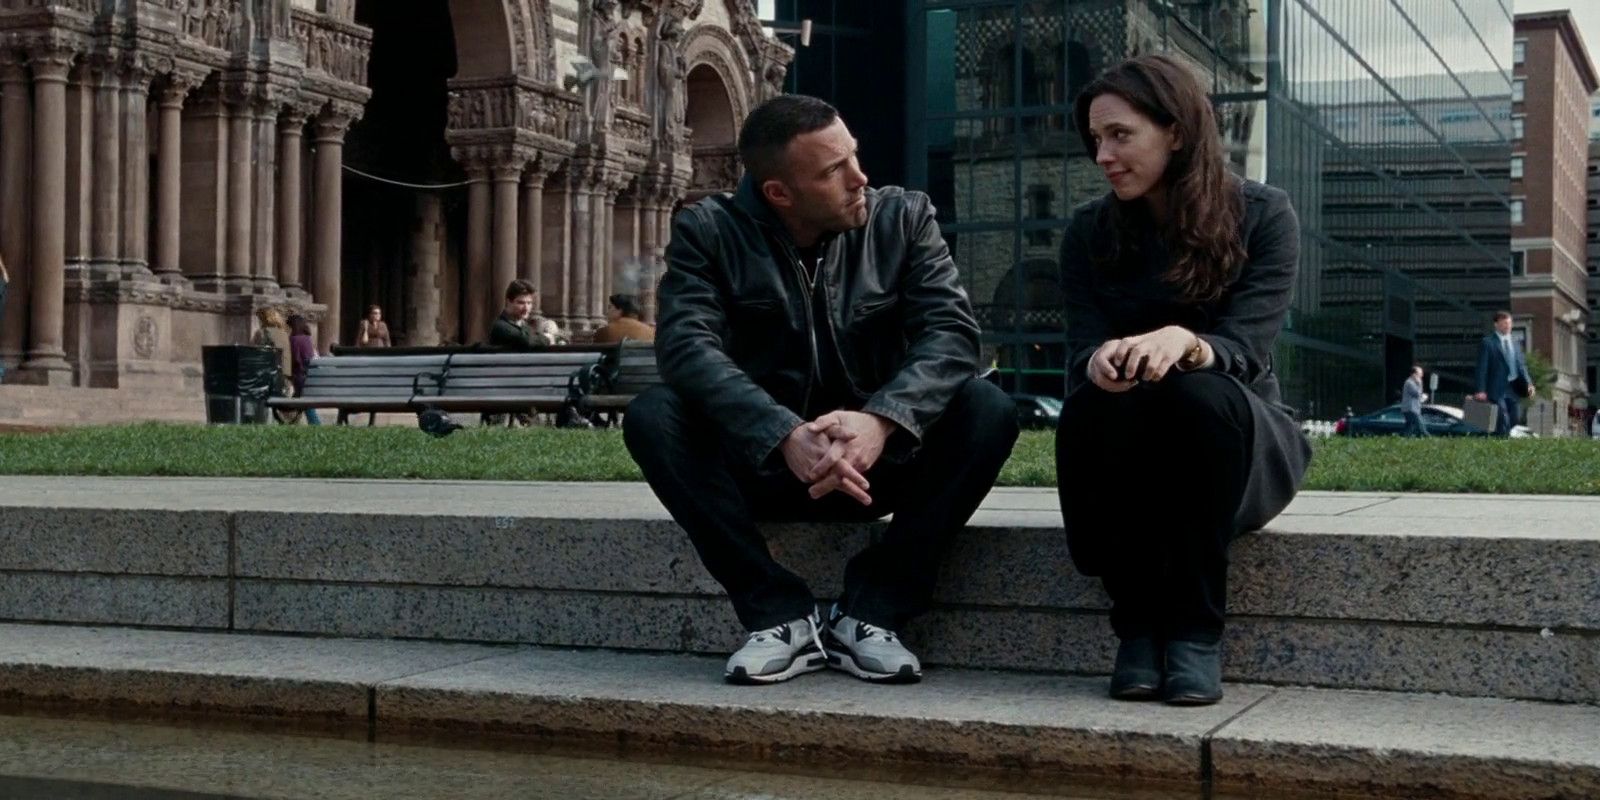 Ben Affleck and Rebecca Hall on the set of 'The Town' filming in